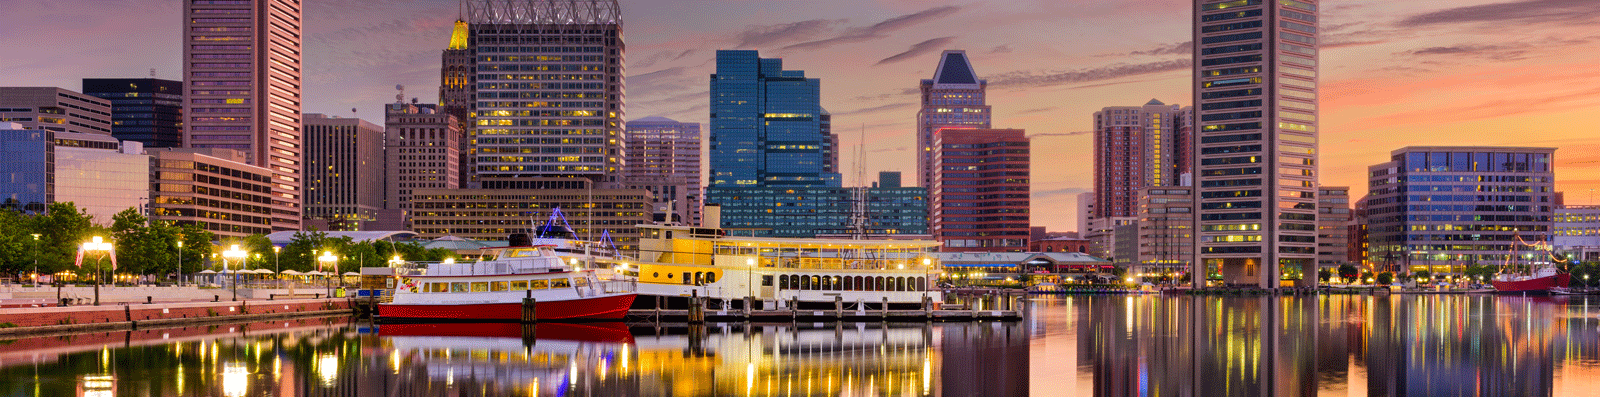 The Renaissance of the Baltimore Harbor